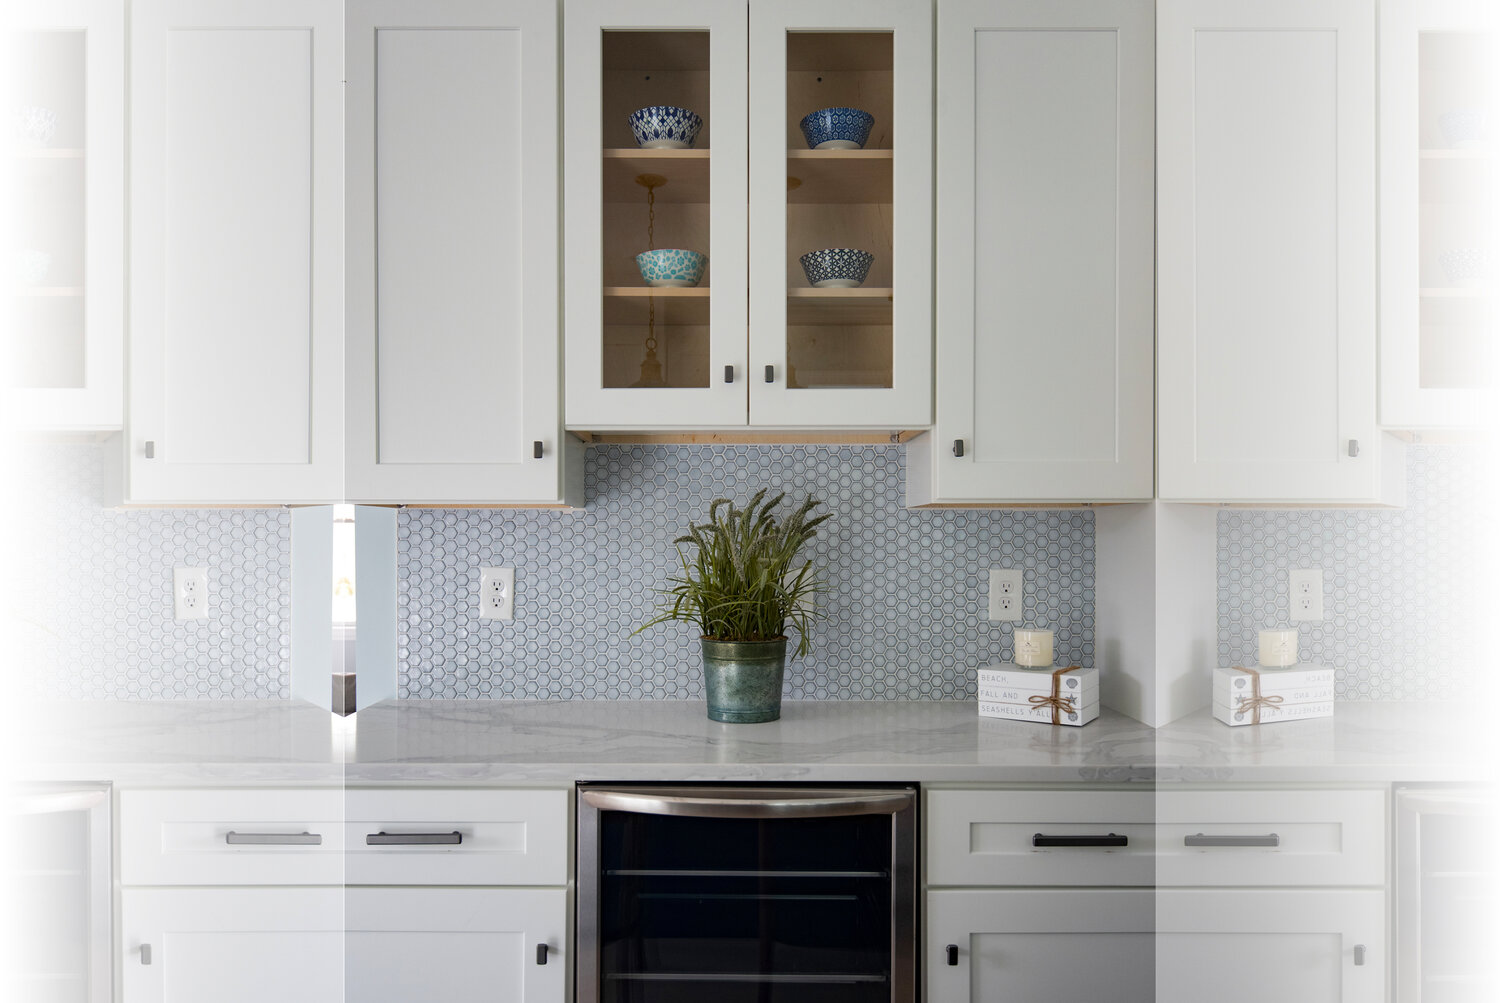 Glass-front upper cabinets create depth; colorful bowls connect to the various blues